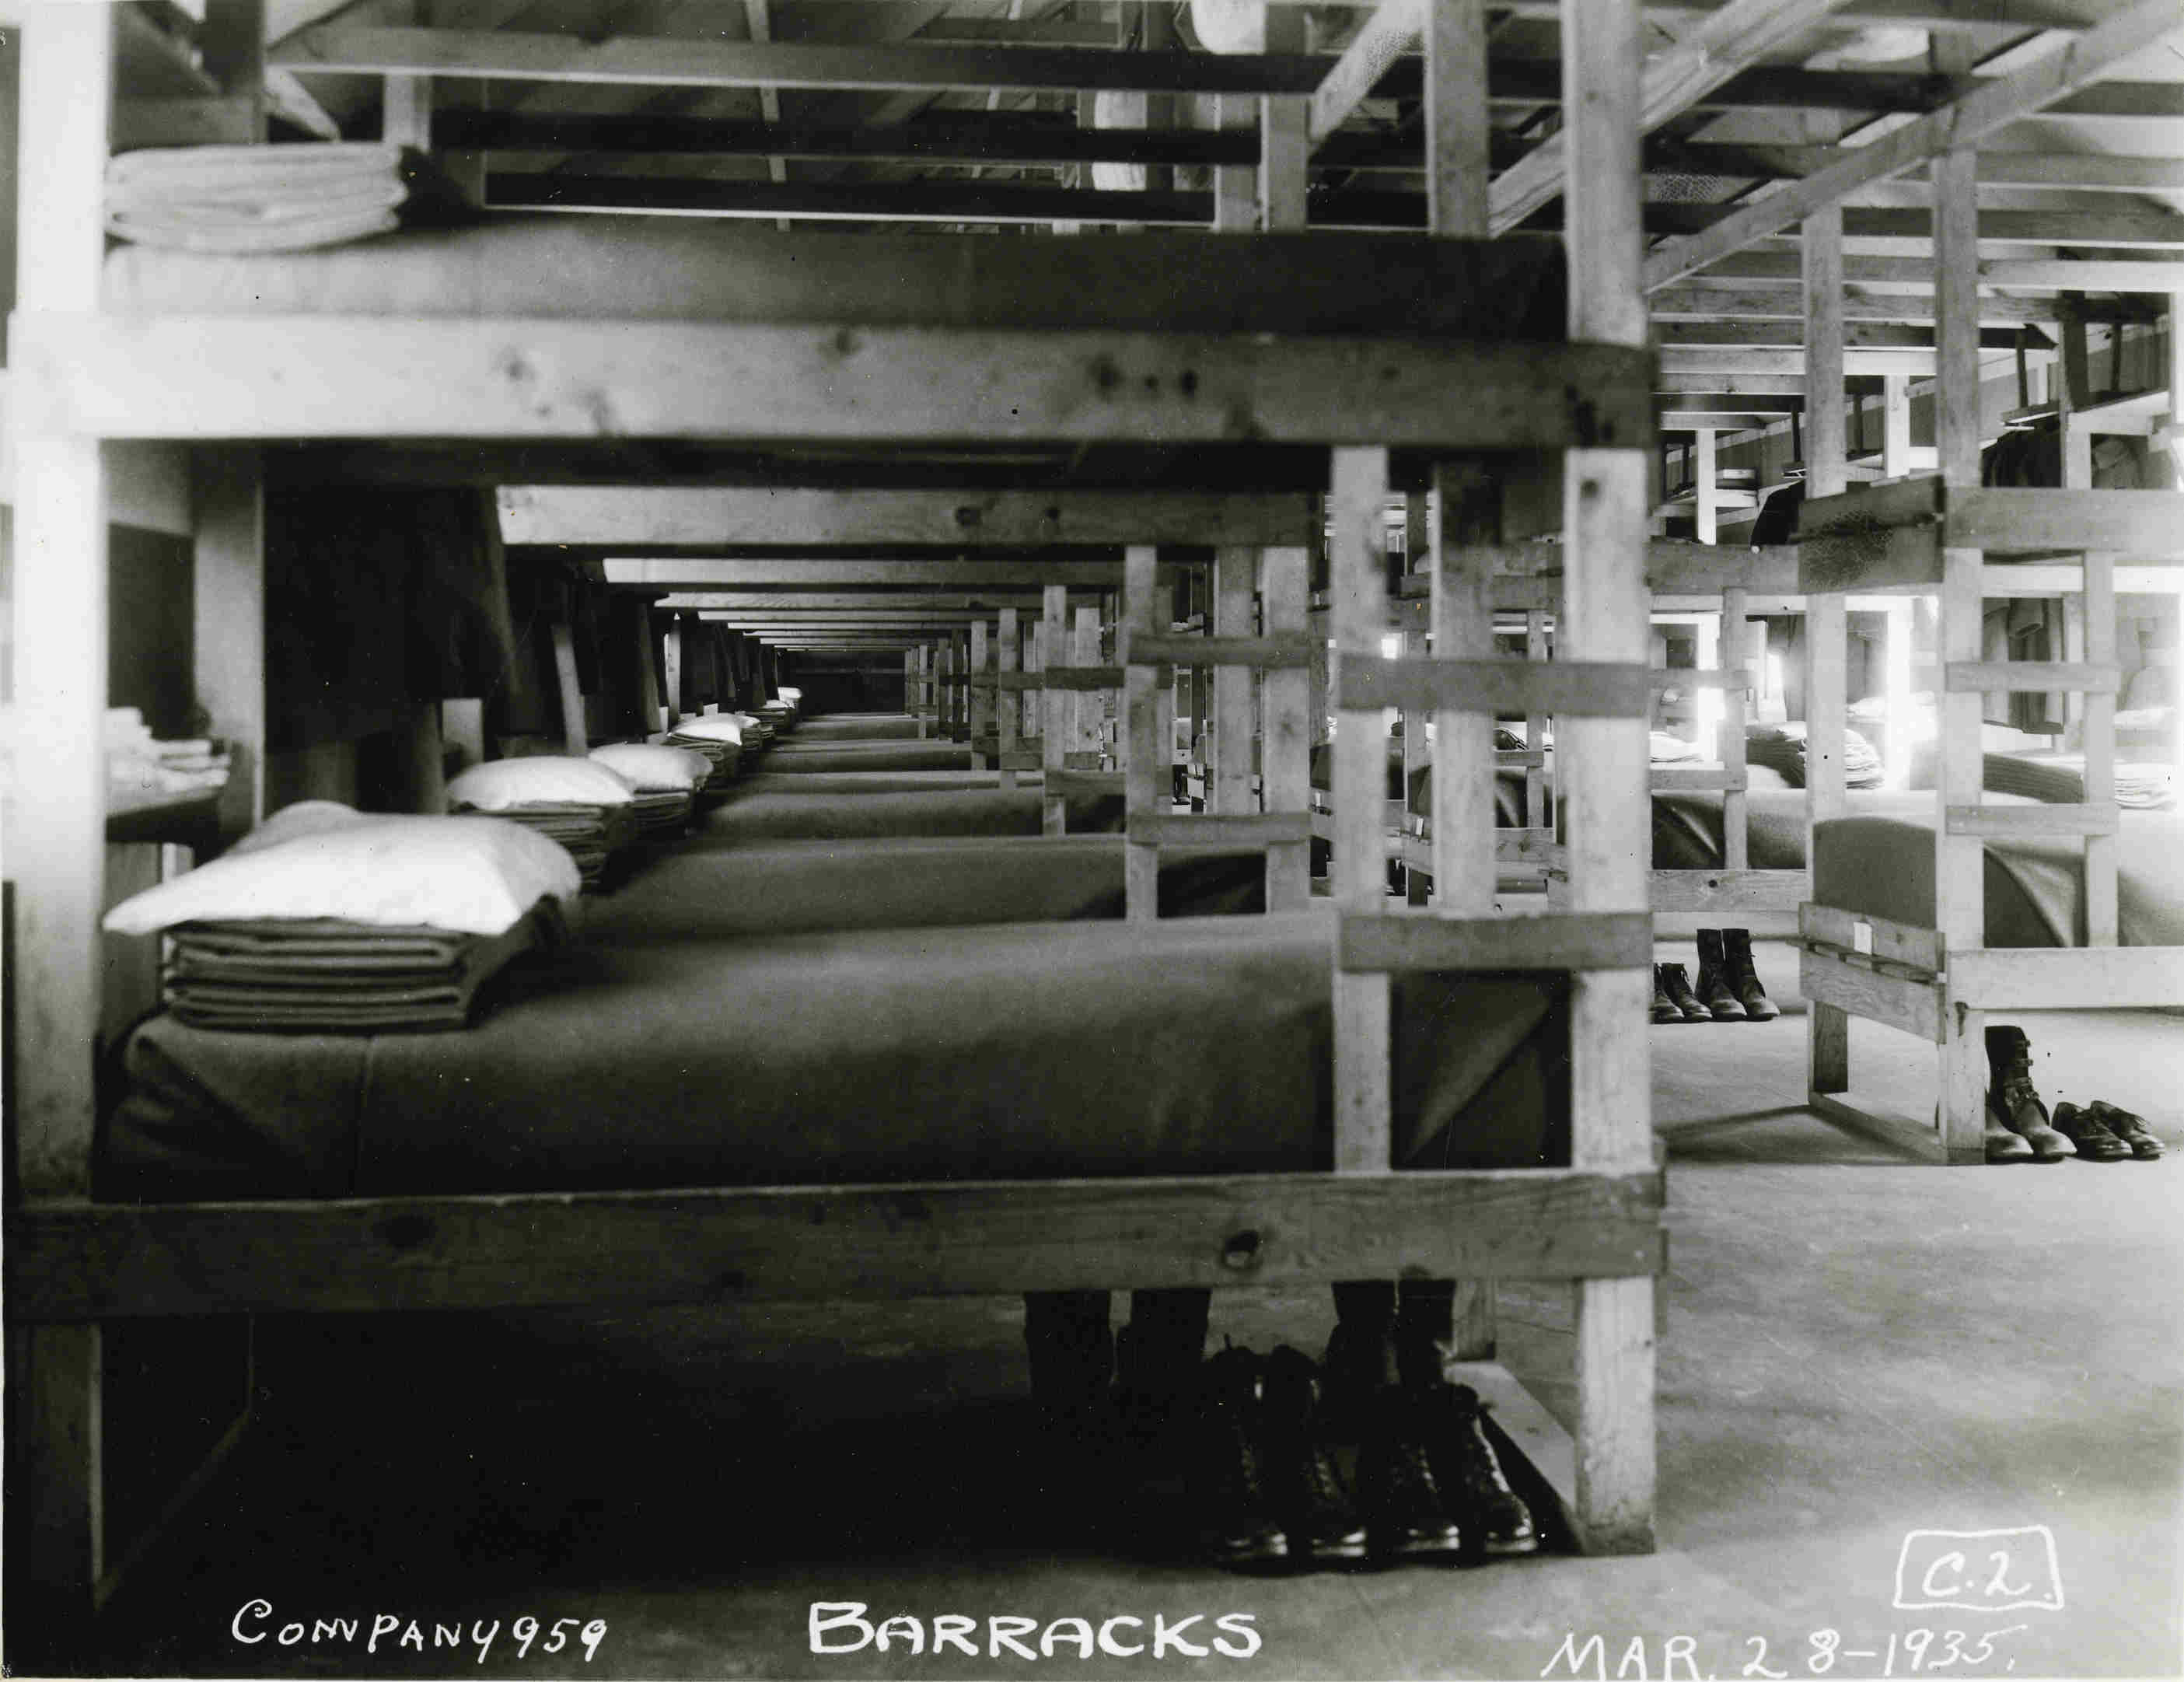 WCHS-01053 Bunks in the CCC Camp 959 barracks